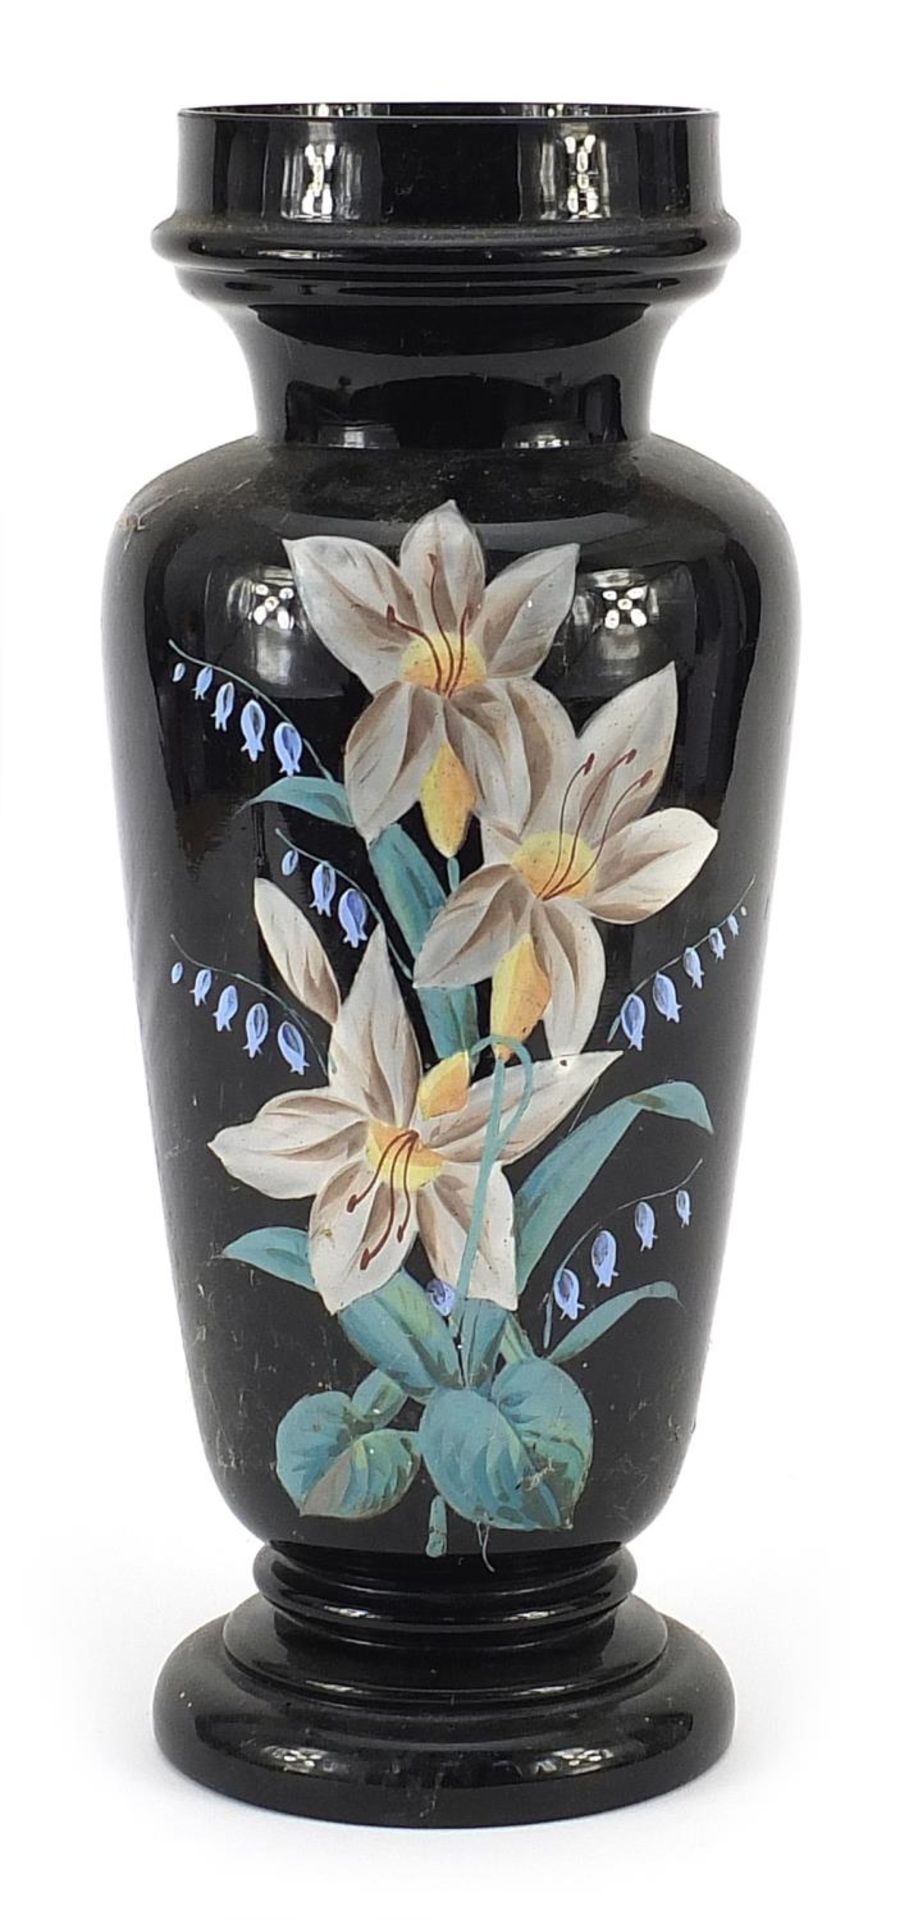 19th century black opaline glass vase hand painted with flowers, 34cm high